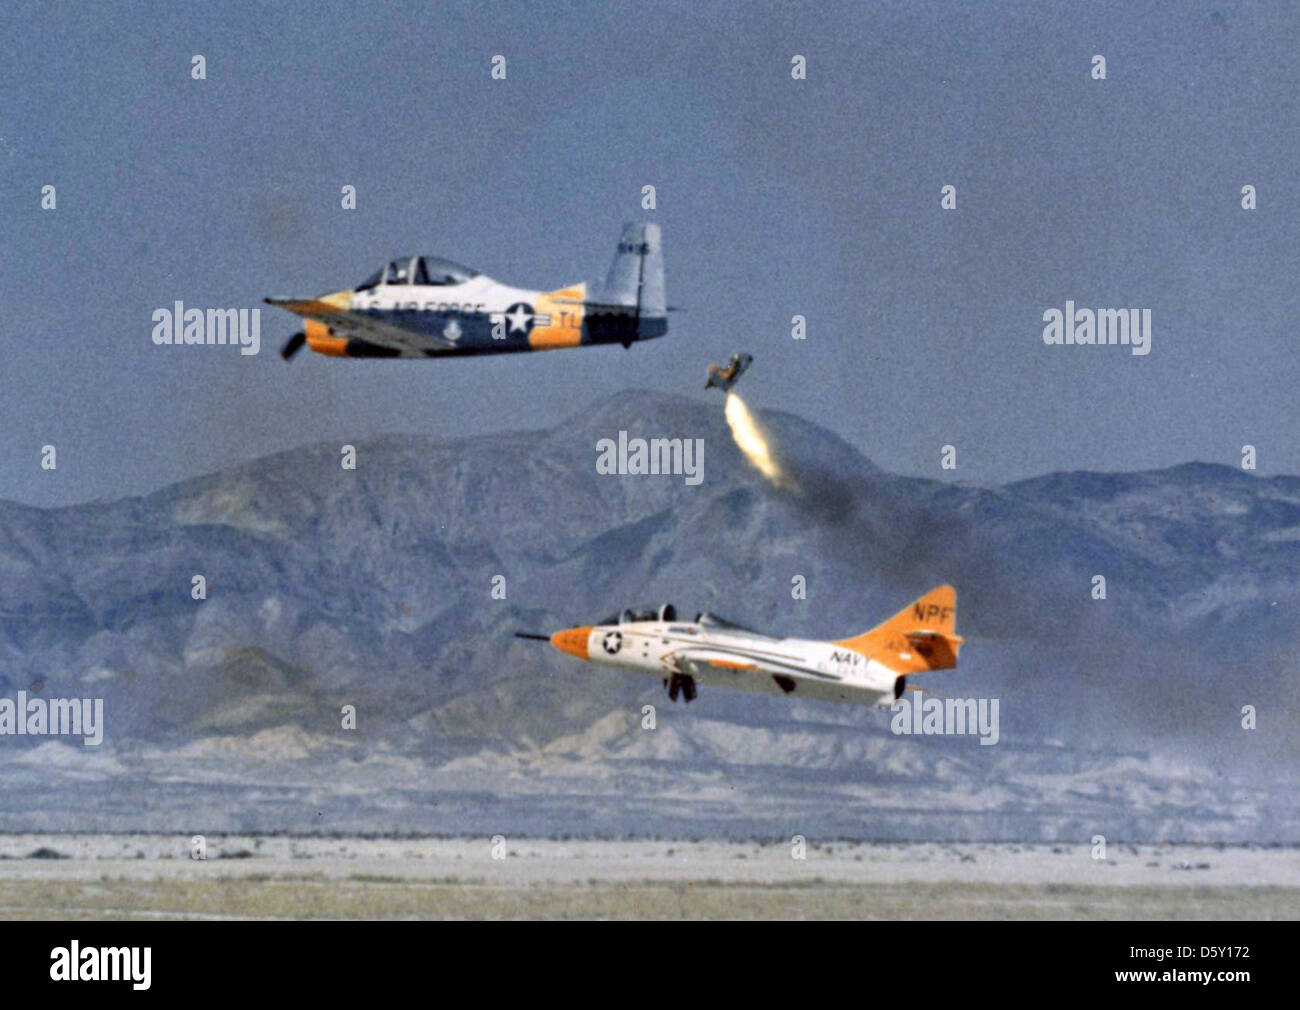 Trailed by a USAF North American T-28A 'Trojan', a dummy ejects from the cockpit of a USN Grumman TF-9J 'Cougar' (BuNo 142448) during a demonstration at the U.S. Naval Aerospace Recovery Facility at El Centro, California in 1964. Stock Photo